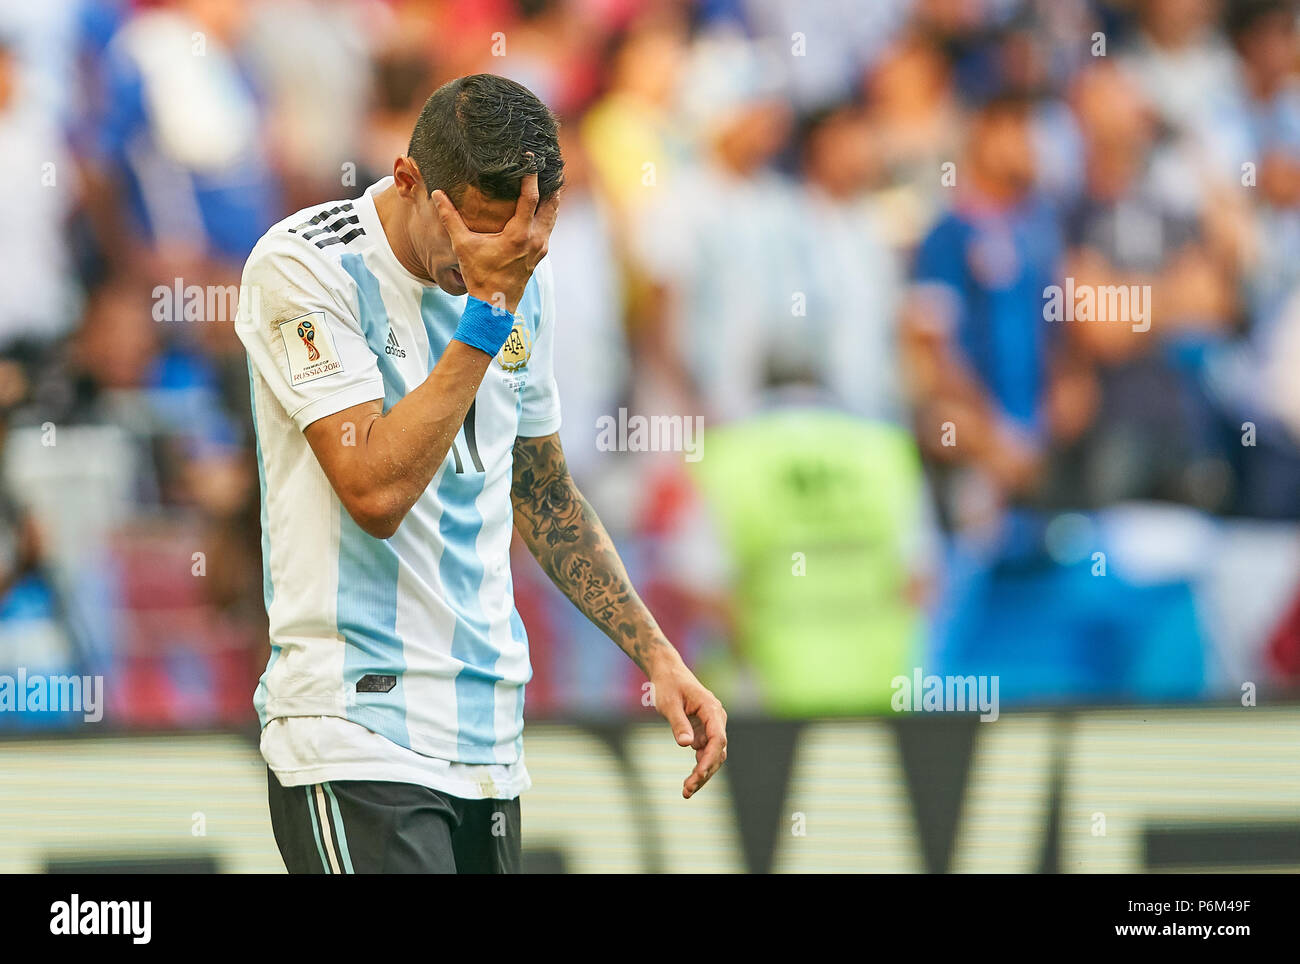 Kazan, Russia. 30th Jun, 2018. Argentina - France 3-4, Soccer, Kazan, June  30, 2018 Angel DI MARIA, Argentina 11 sad, disappointed, angry, Emotions,  disappointment, frustration, frustrated, sadness, desperate, despair,  ARGENTINA - FRANCE